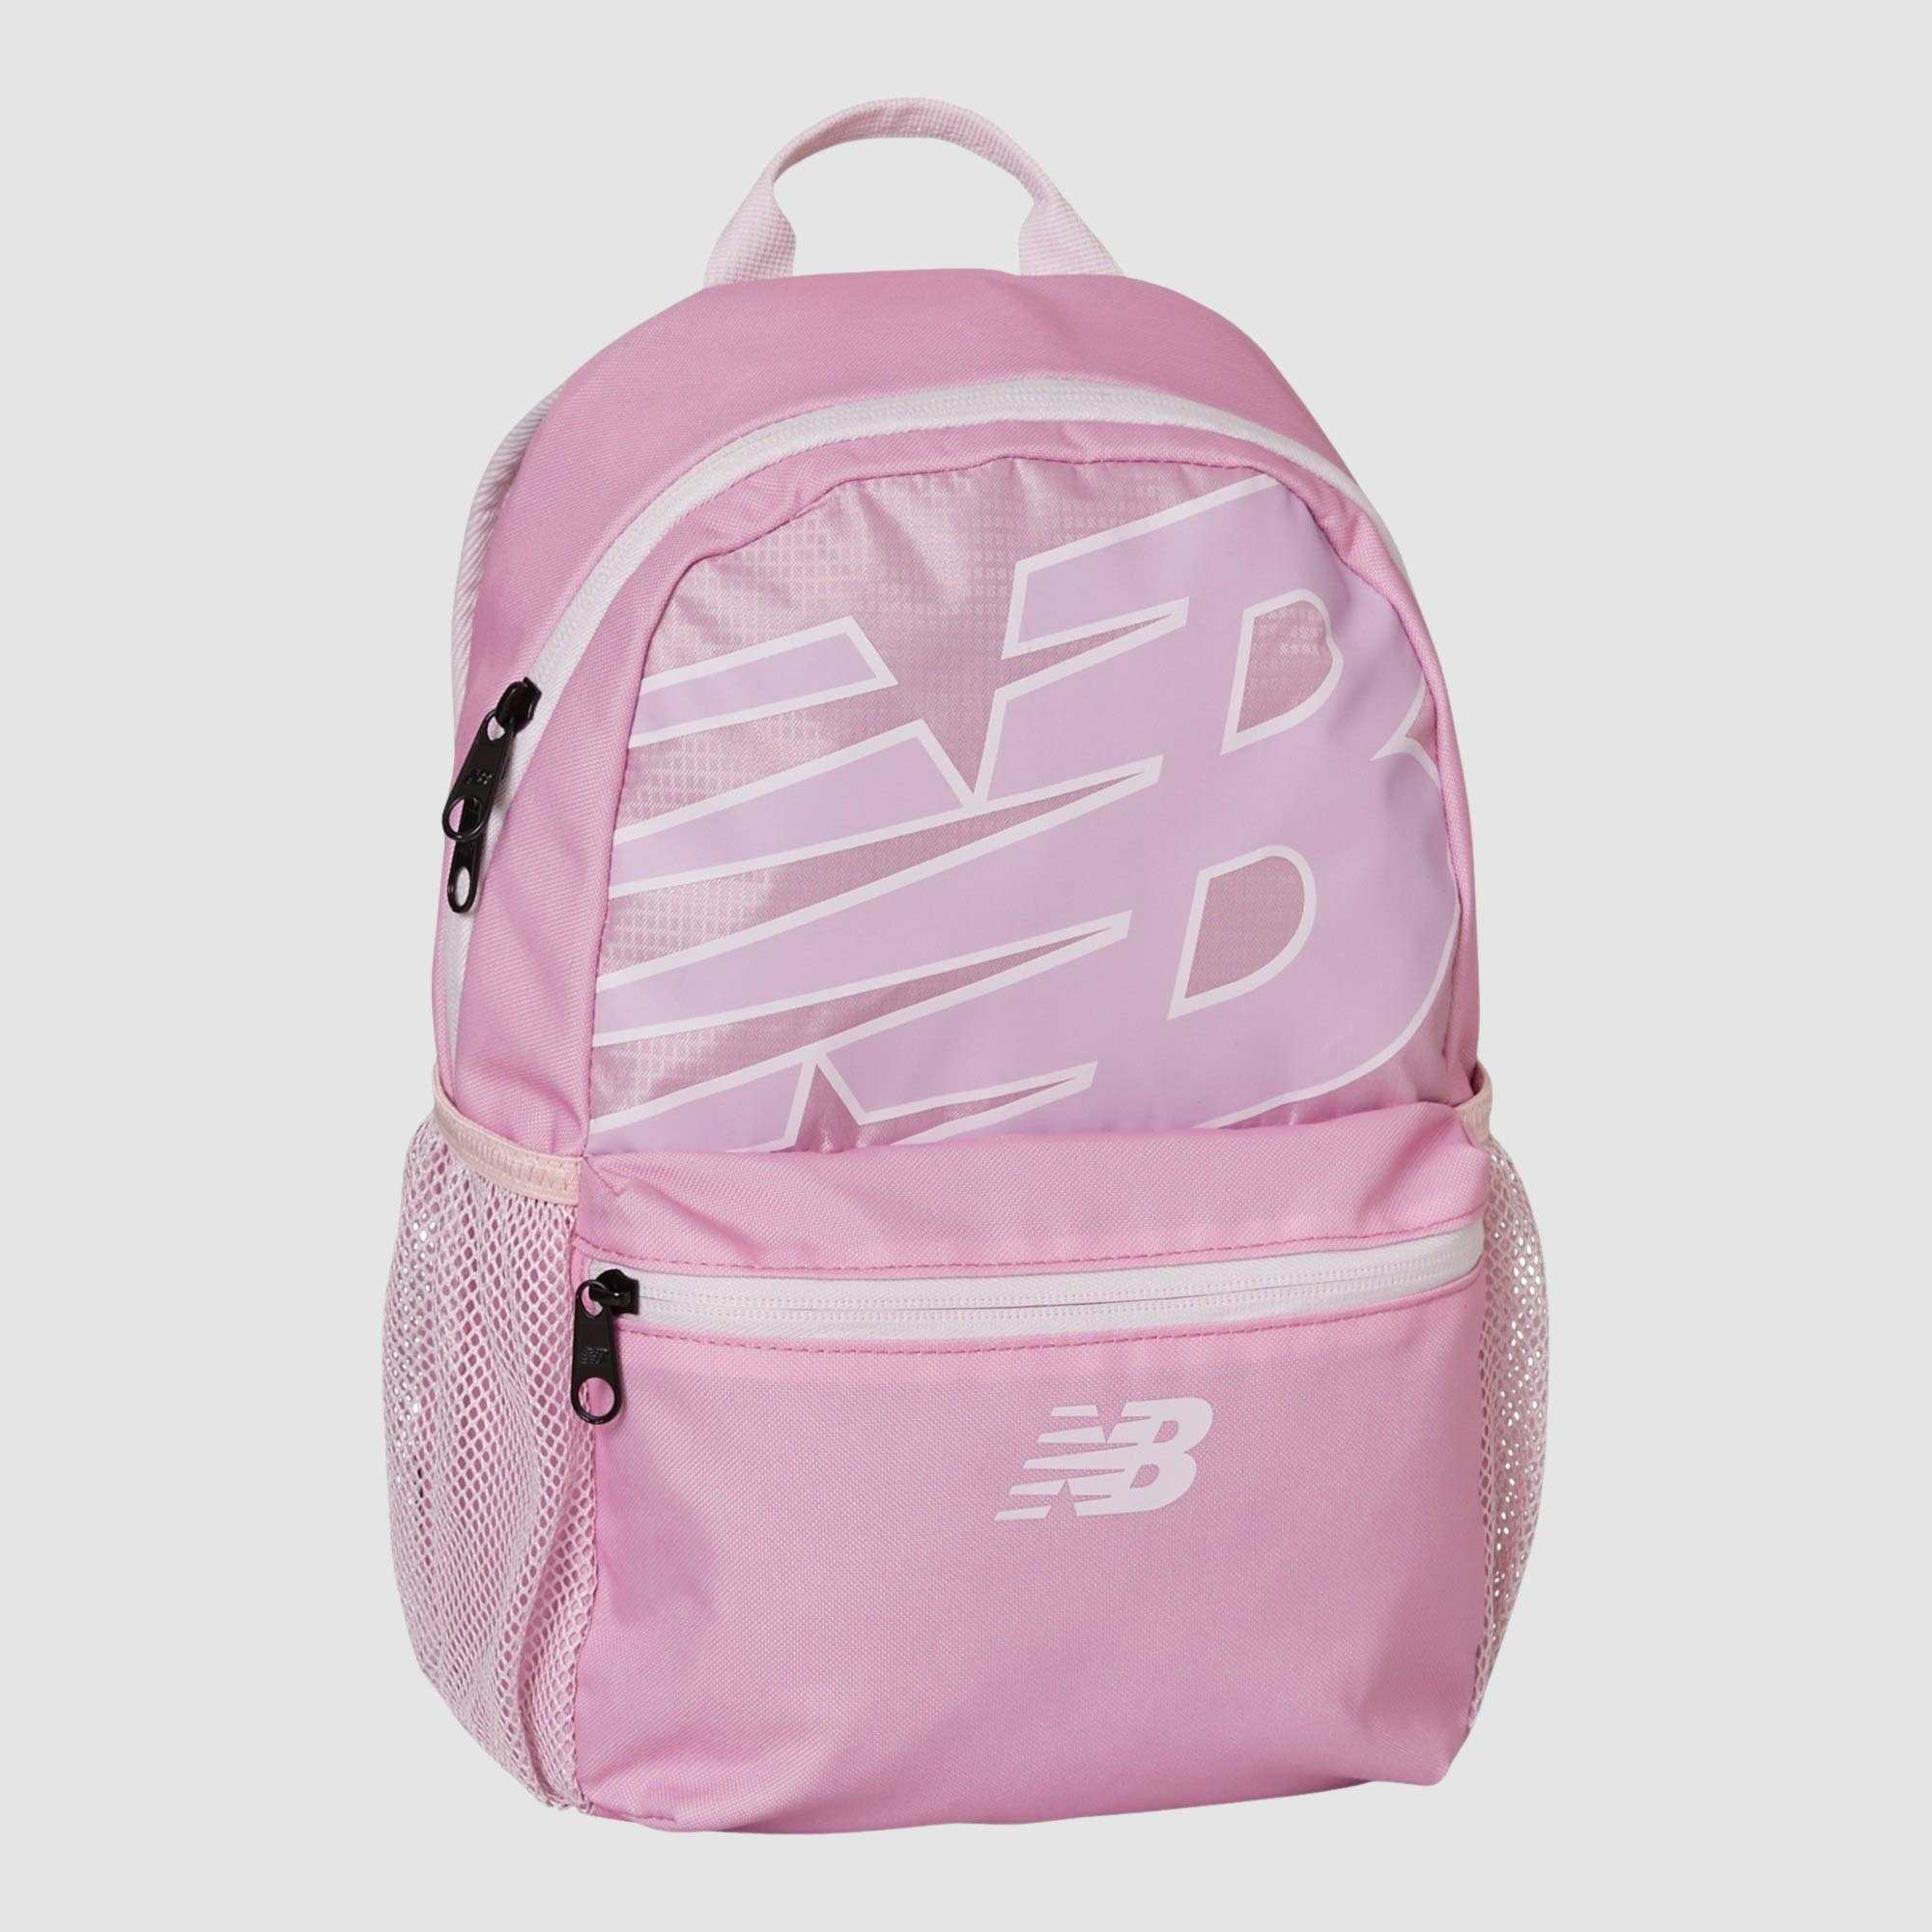 New Balance XS Backpack Pink 12 Litres